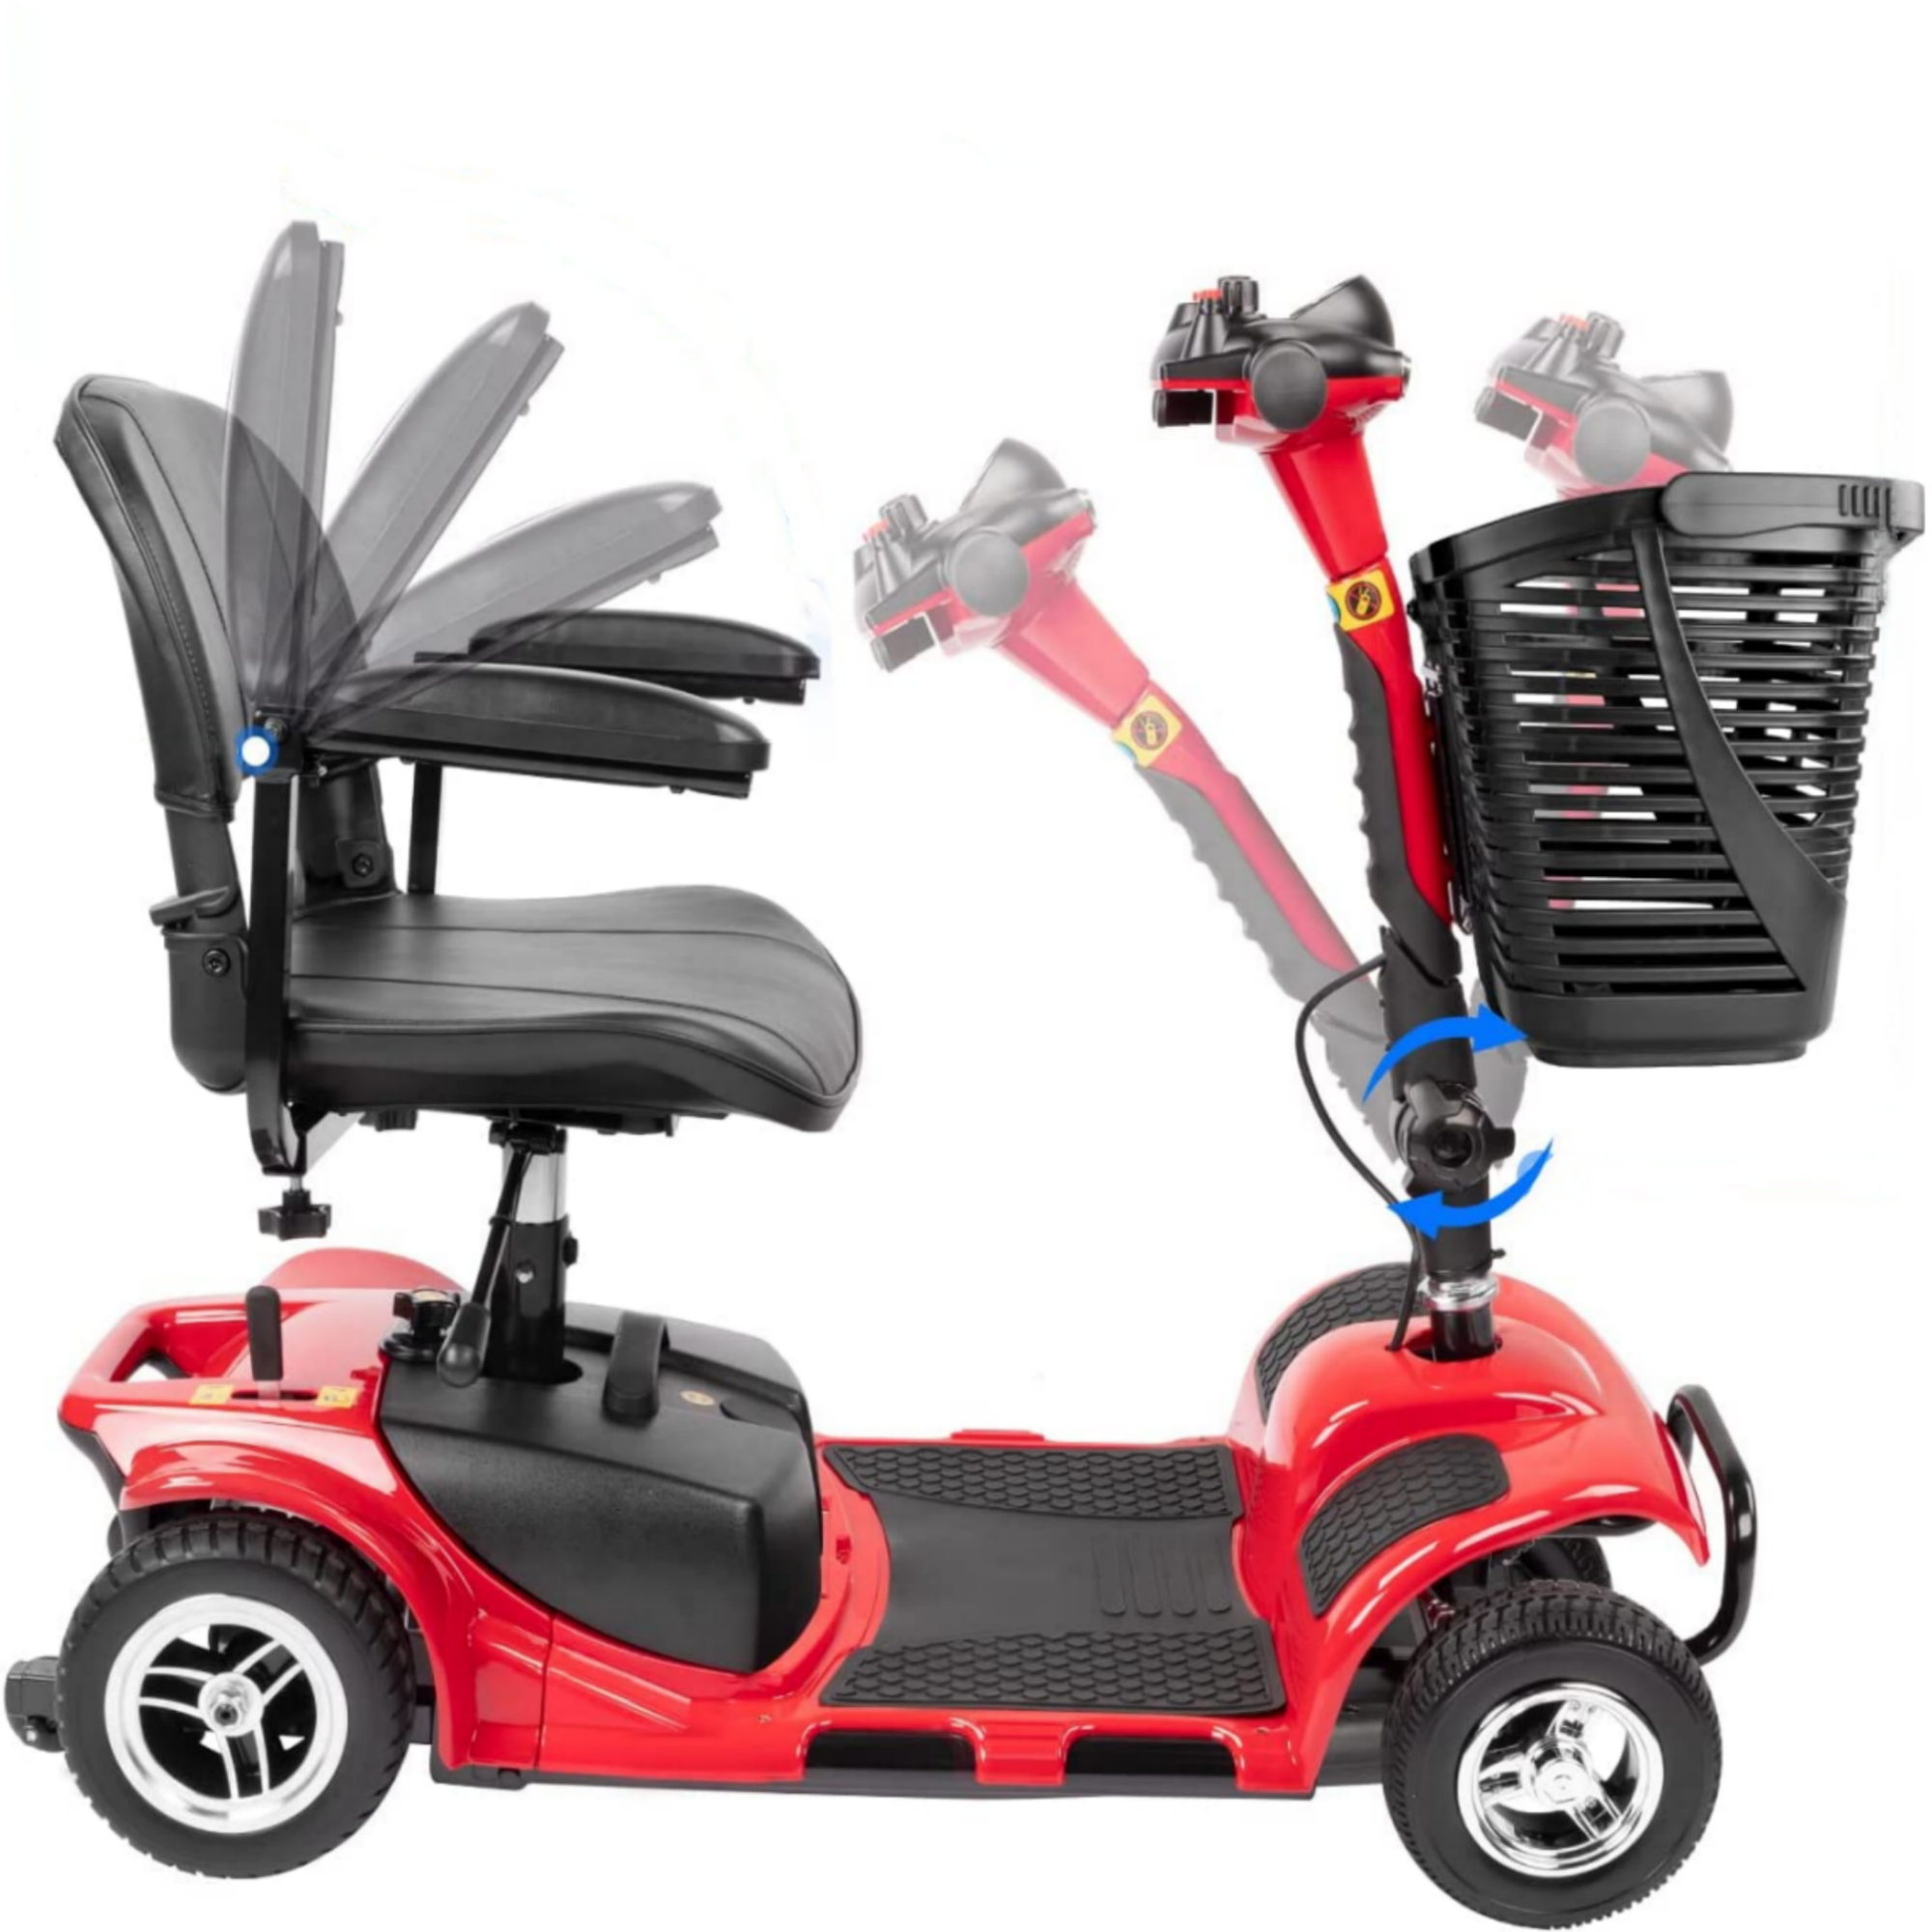 1inchome 4 Wheel Mobility Scooter for Seniors, Folding Electric Powered Wheelchair Device for Adults, Elderly, Gift for Elderly, Red - image 1 of 10